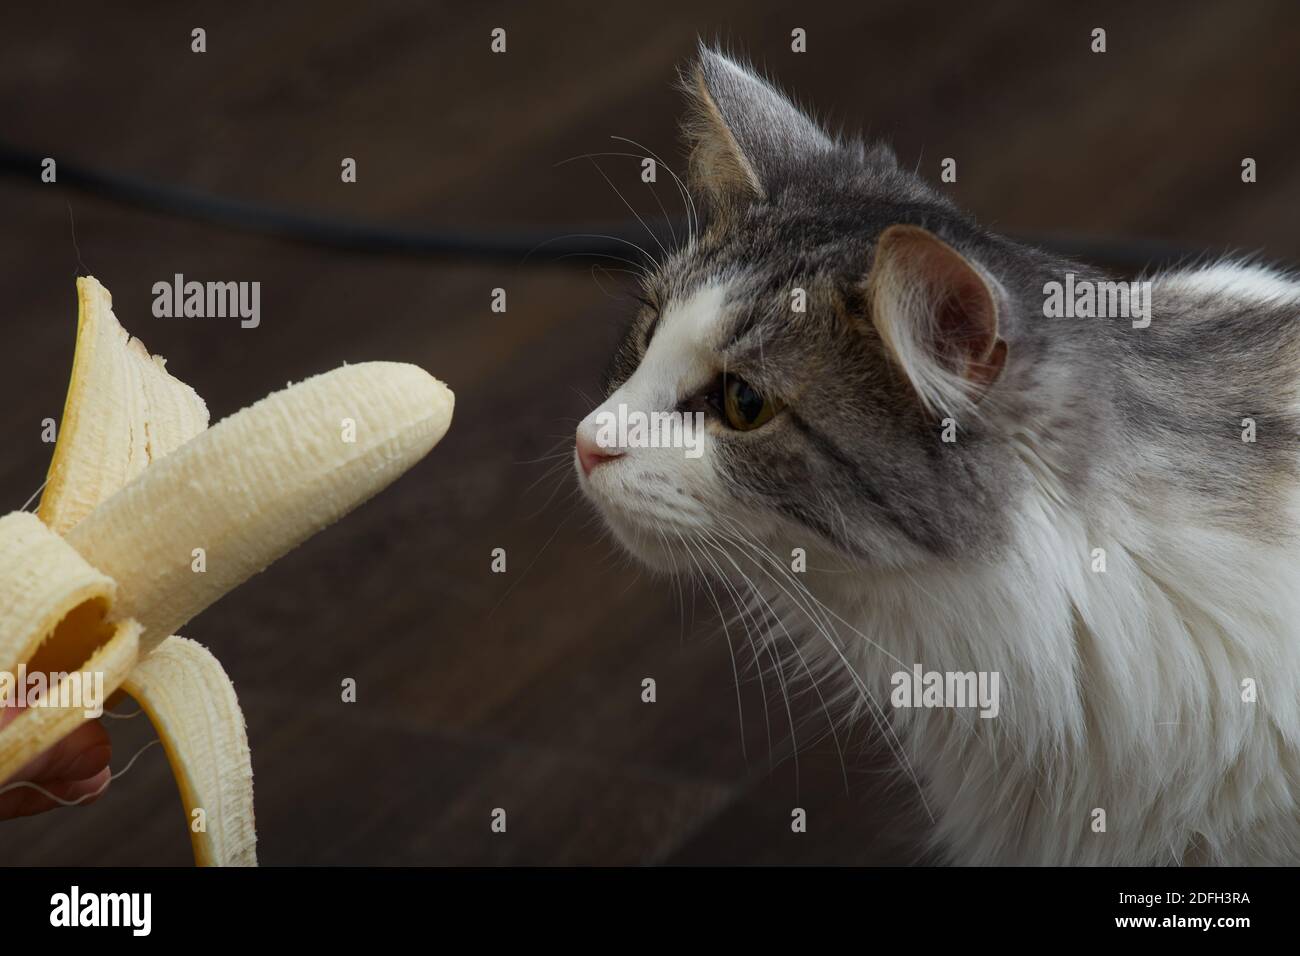 fun fluffy cat looks at banana closeup view, smell it Stock Photo